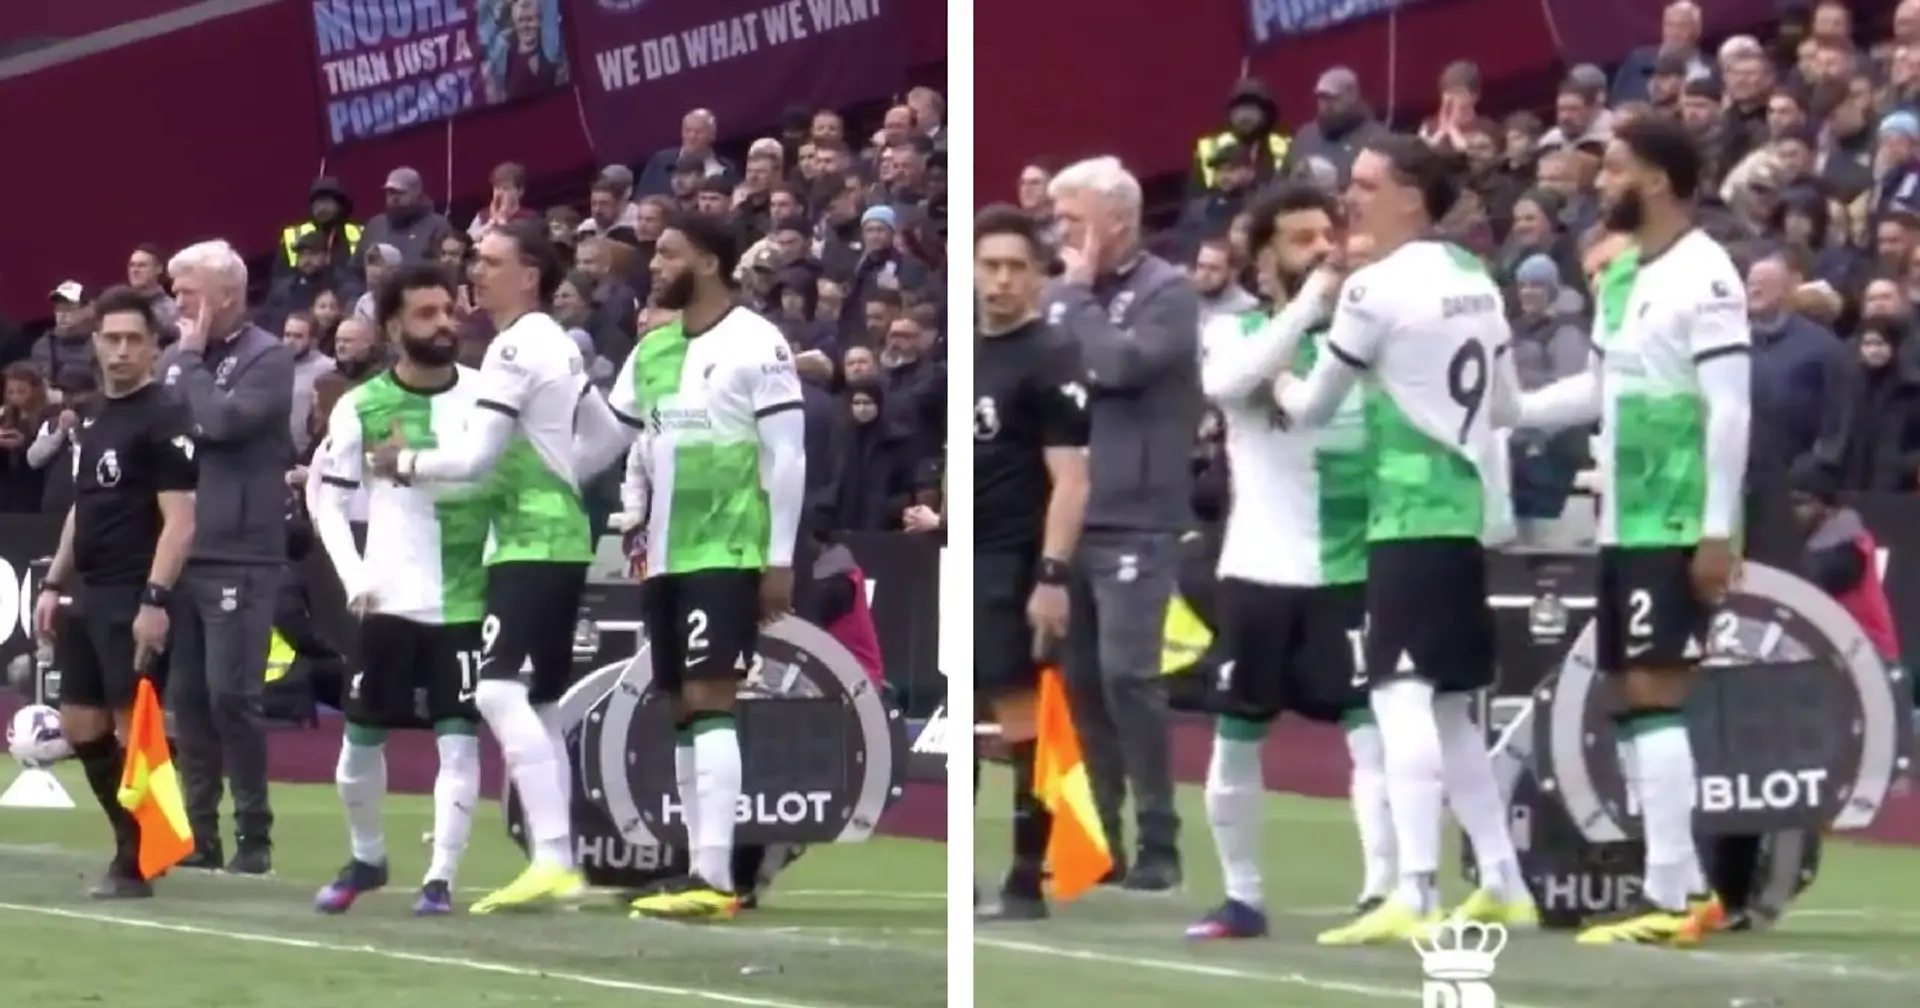 Spotted: Salah feuds with Klopp as West Ham equalize right before he is subbed on